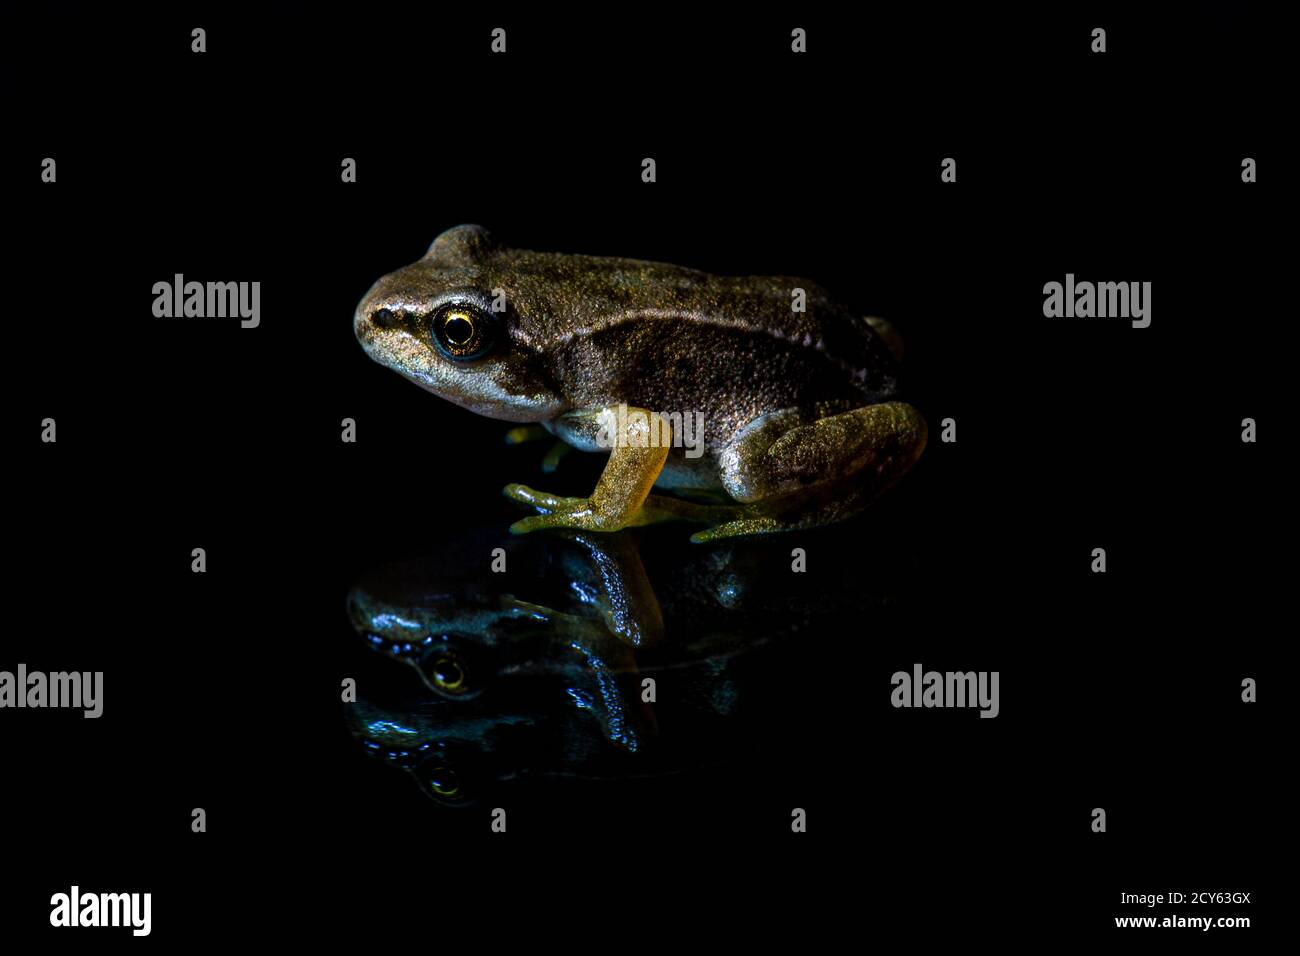 Side view of Froglet of the Common Frog (Rana temporaria) with Relflection on Black Background Stock Photo